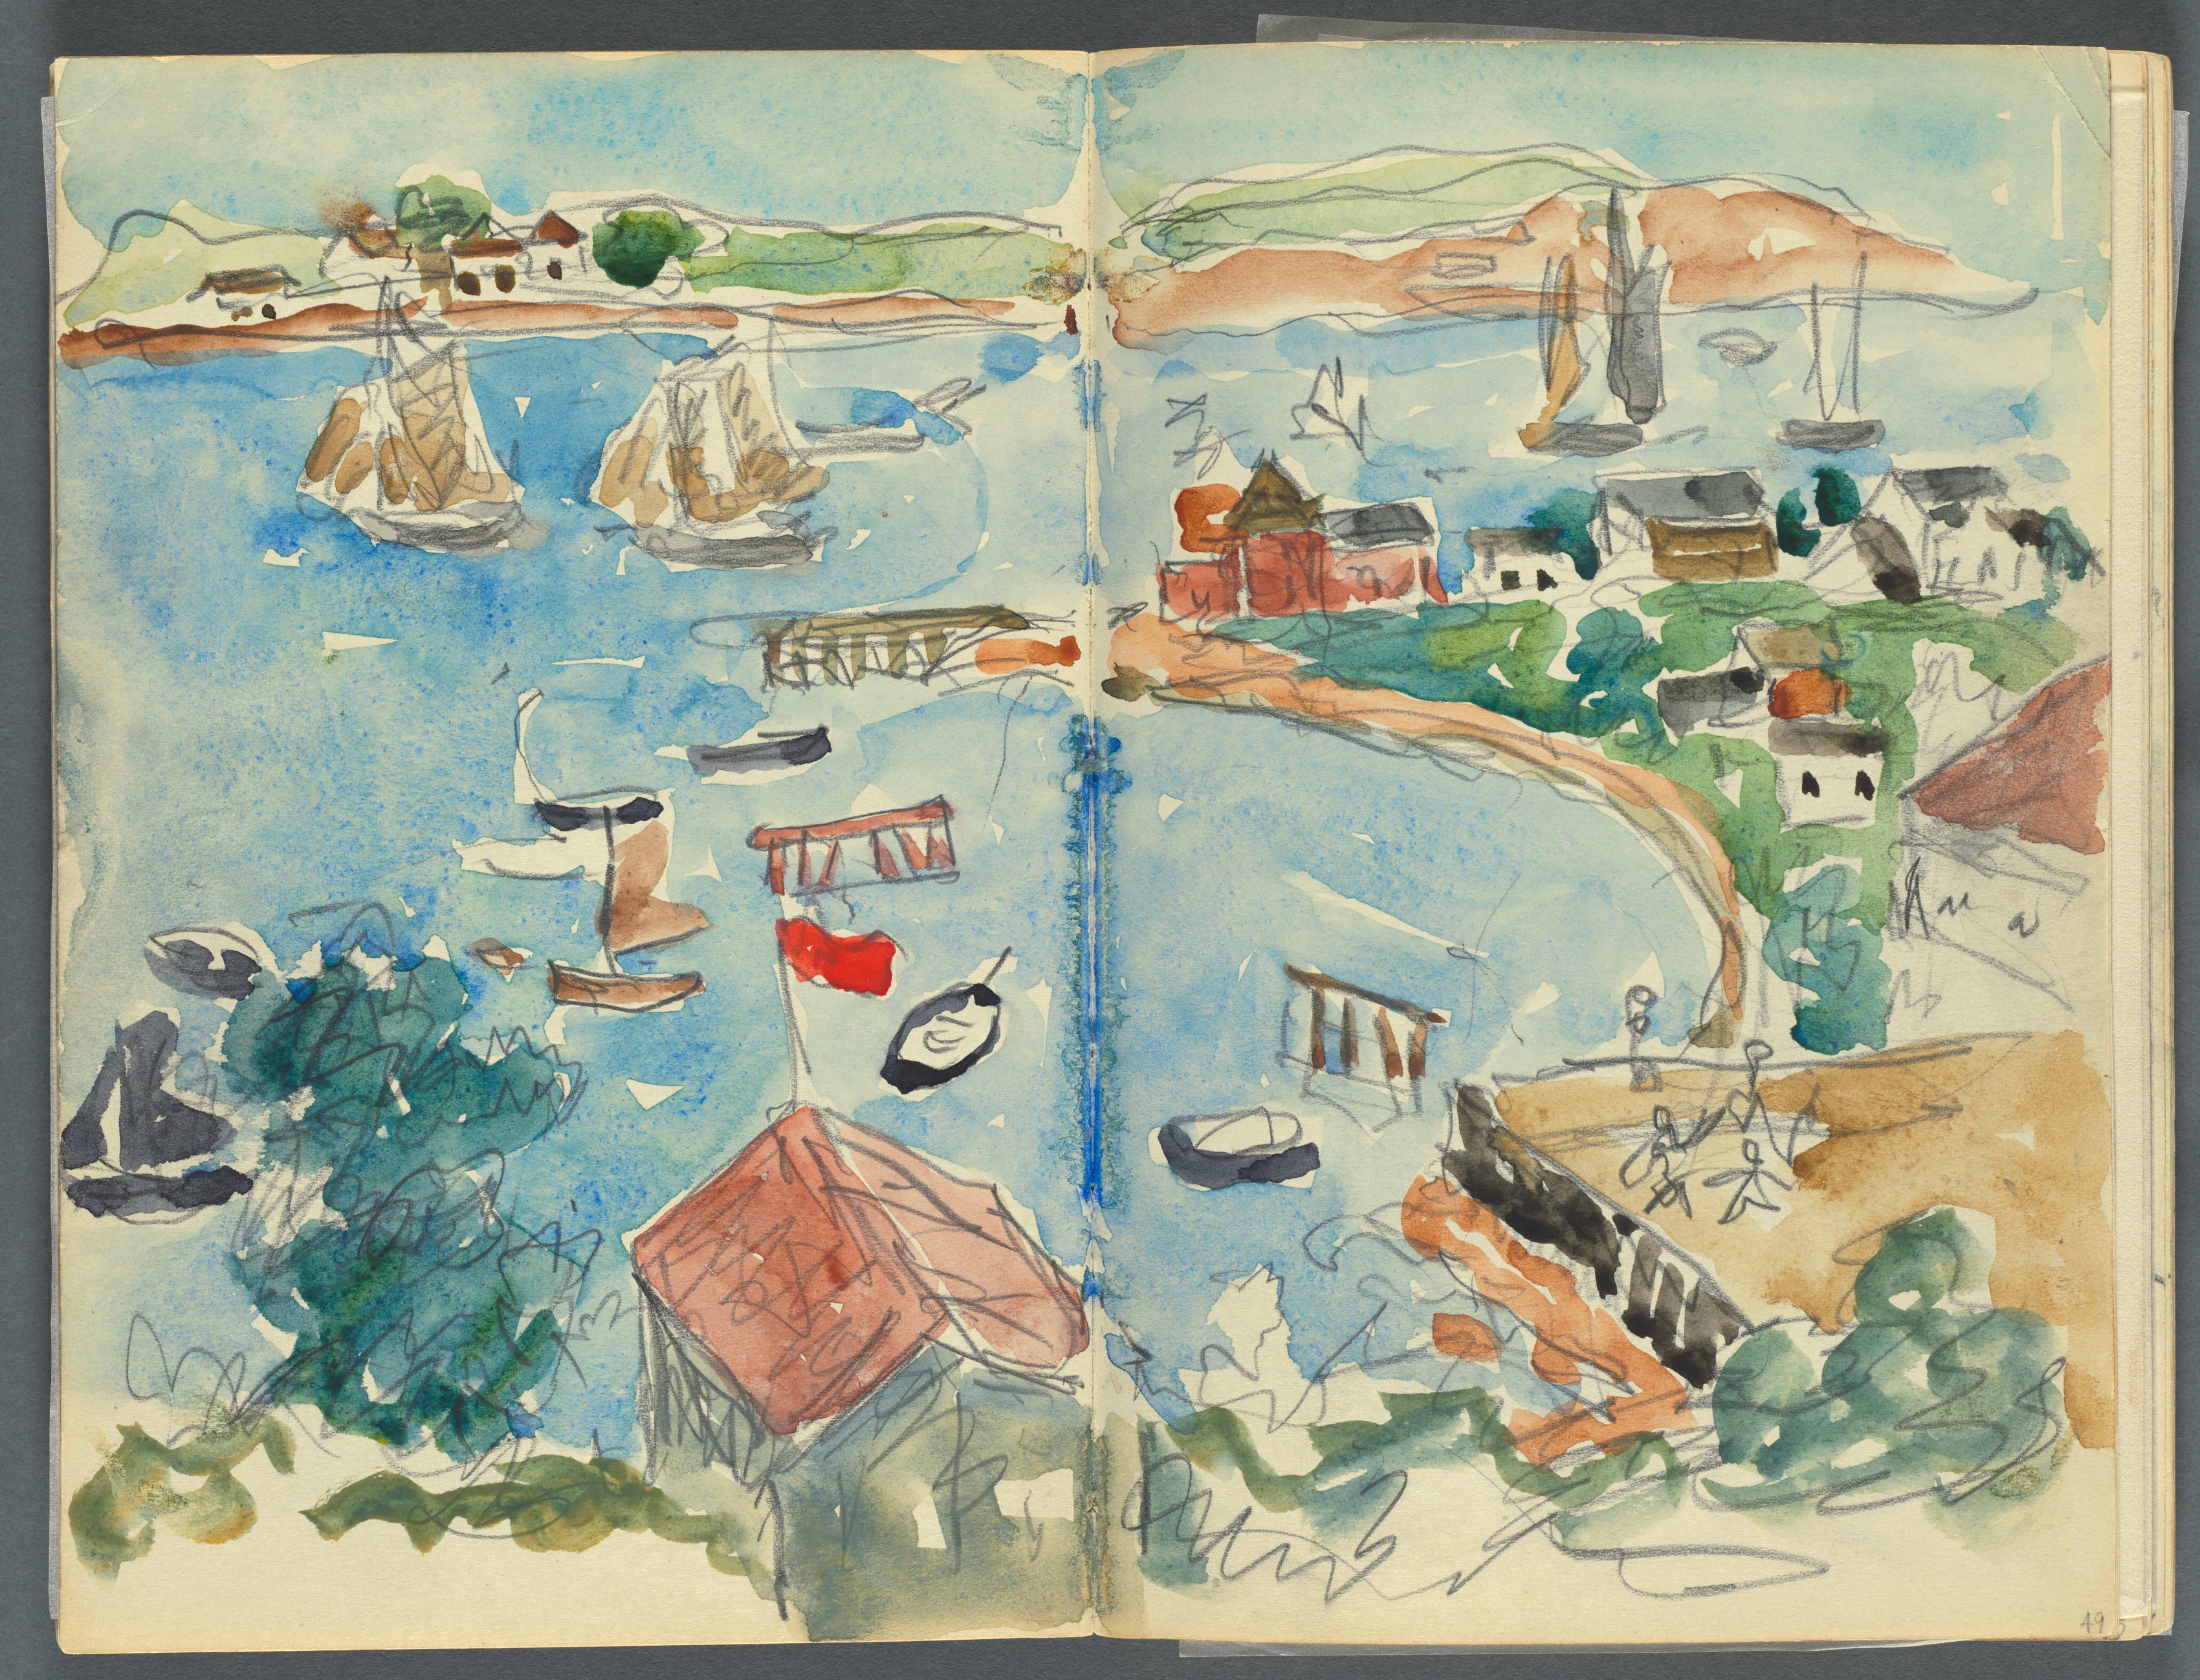 Sketchbook, The Dells, N° 127, page 048 & 49: View of a Cove from above